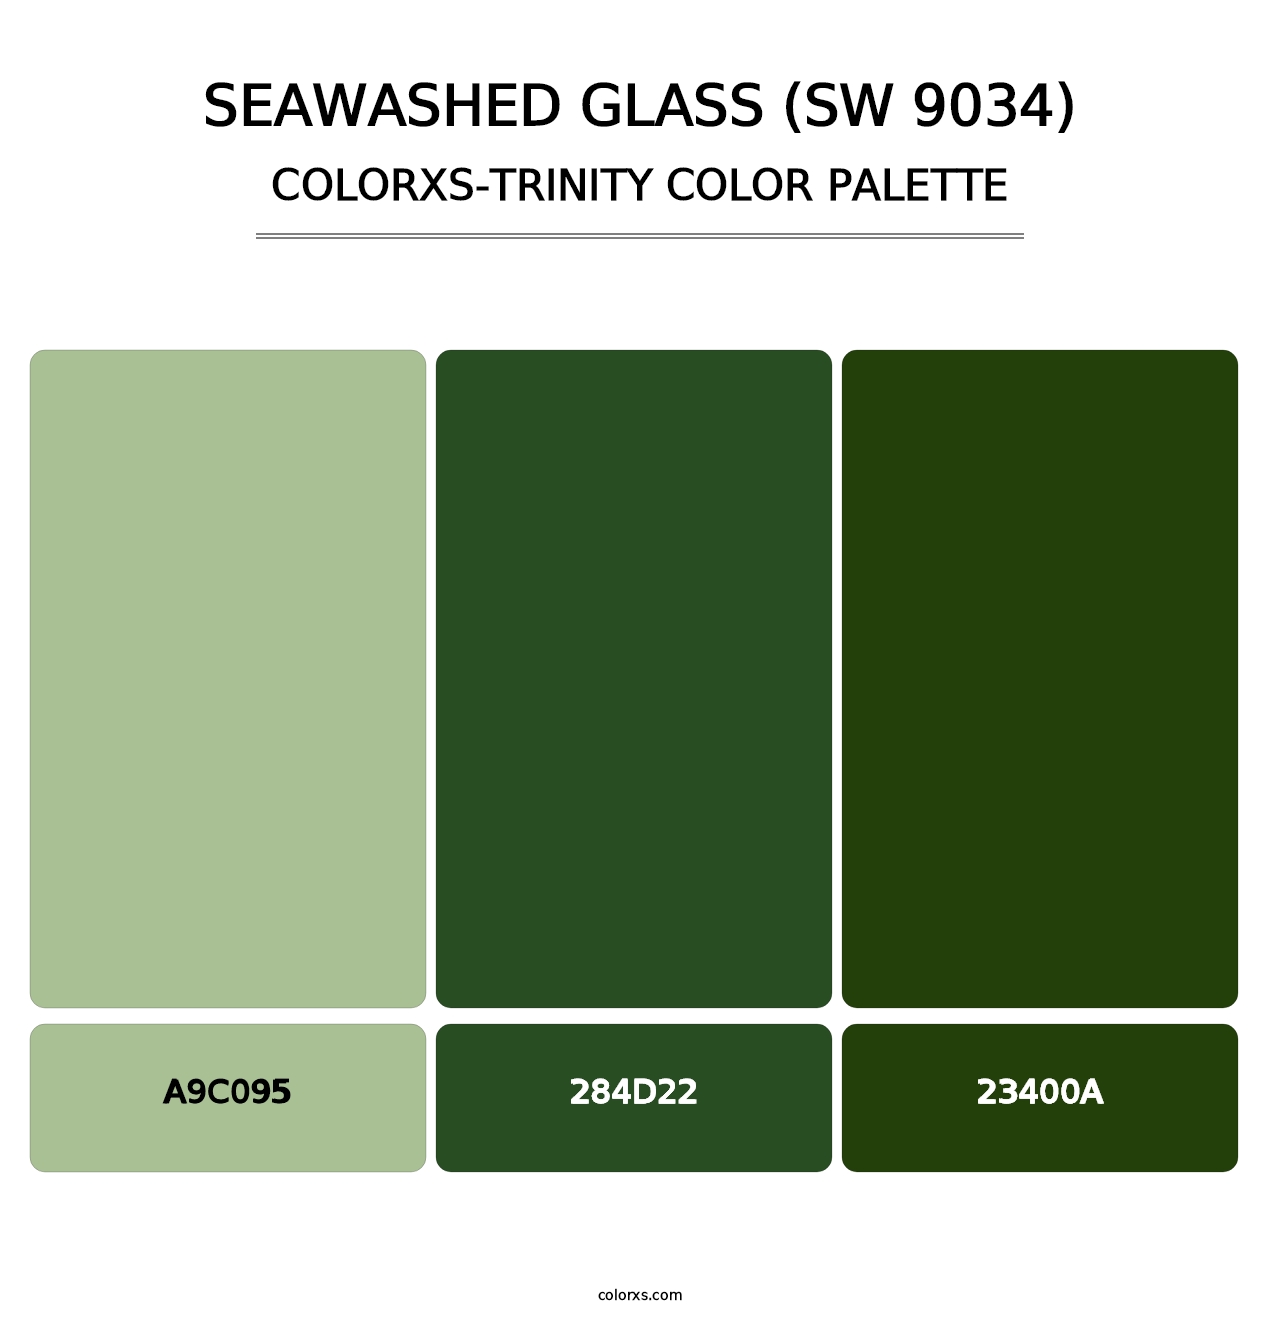 Seawashed Glass (SW 9034) - Colorxs Trinity Palette